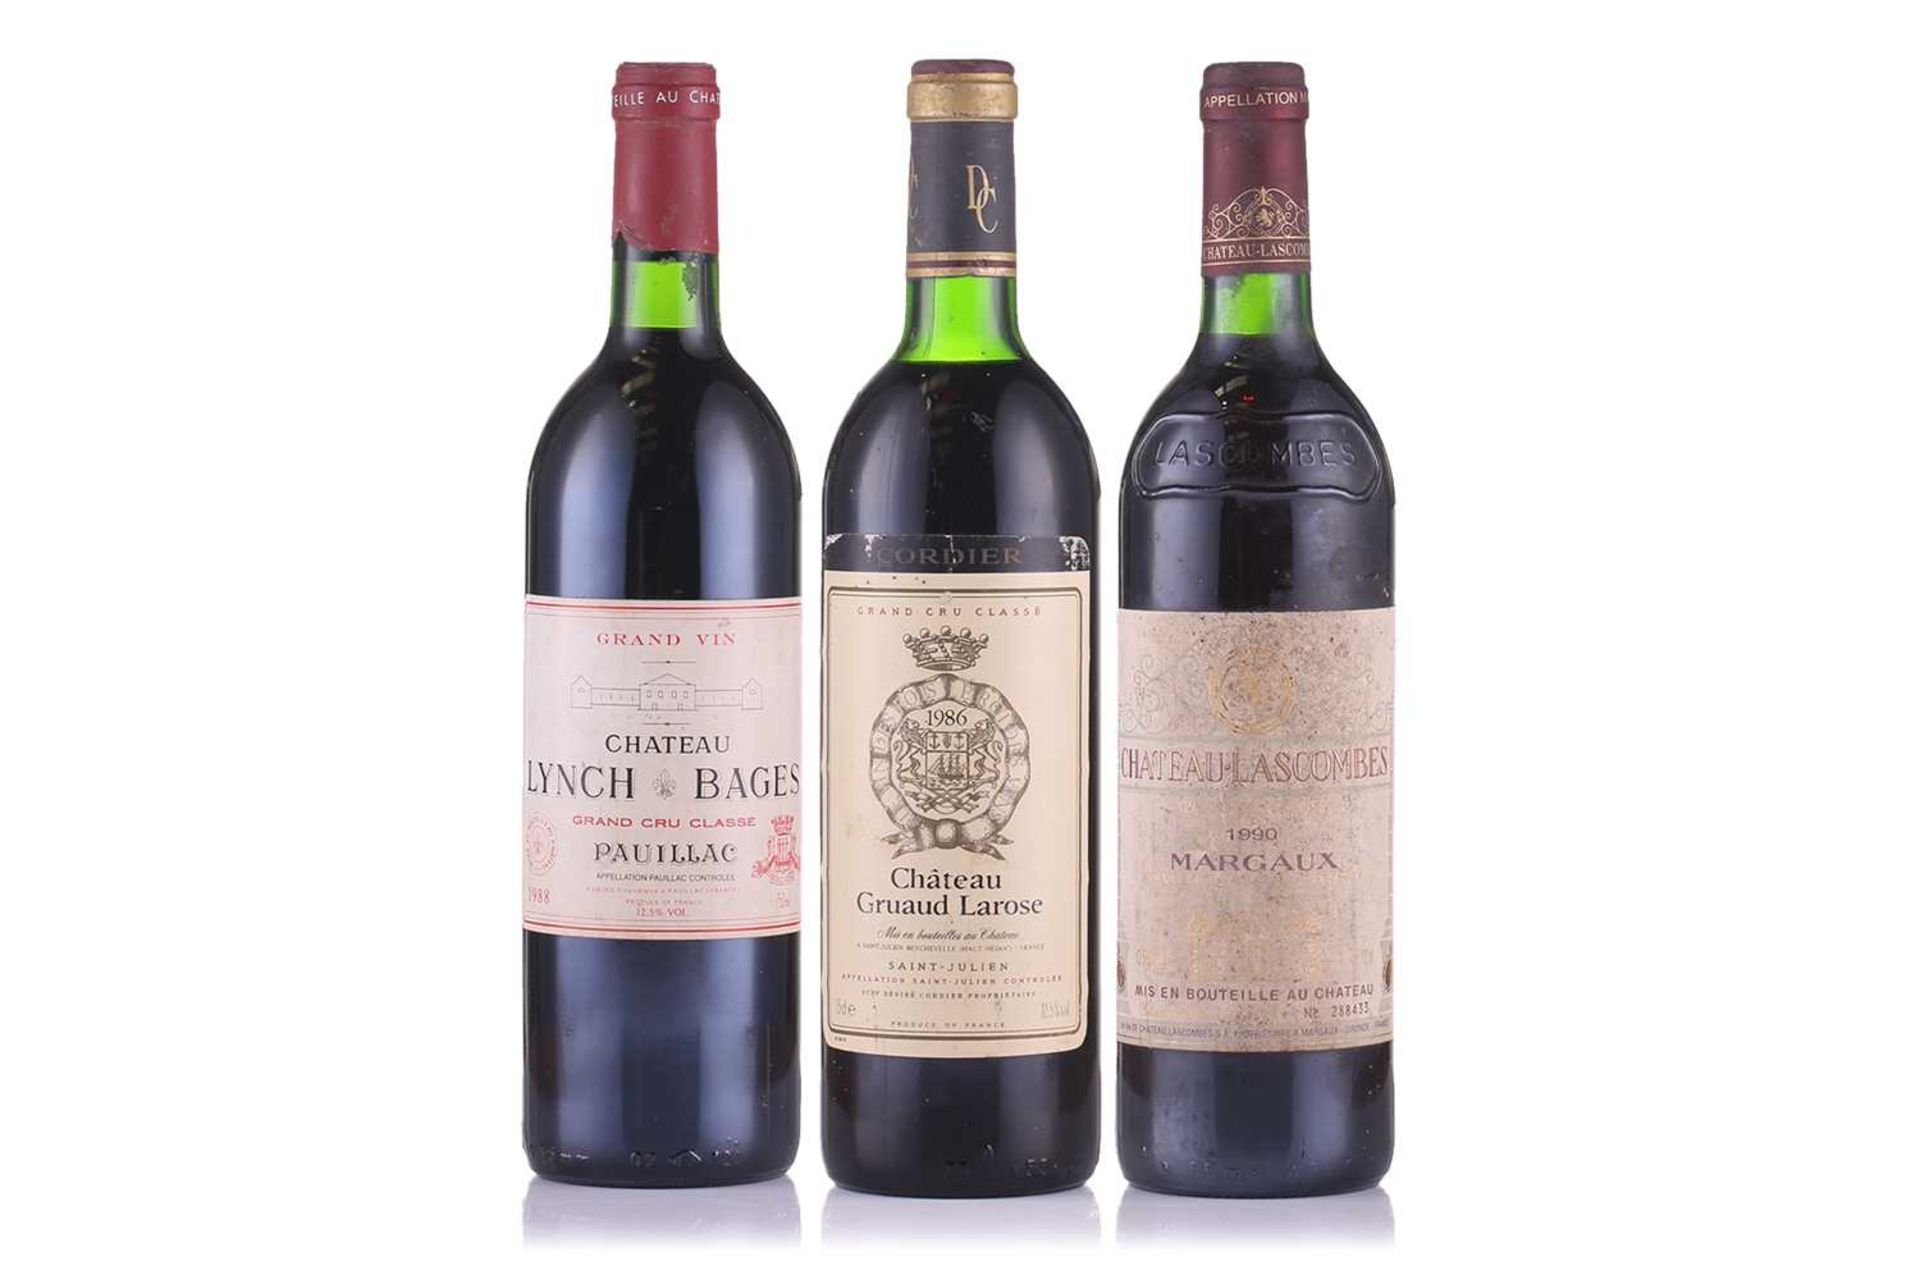 A bottle of 1986 Chateau Gruaud Larose, together with a 1990 Chateau Lascombes and a 1988 Margaux,